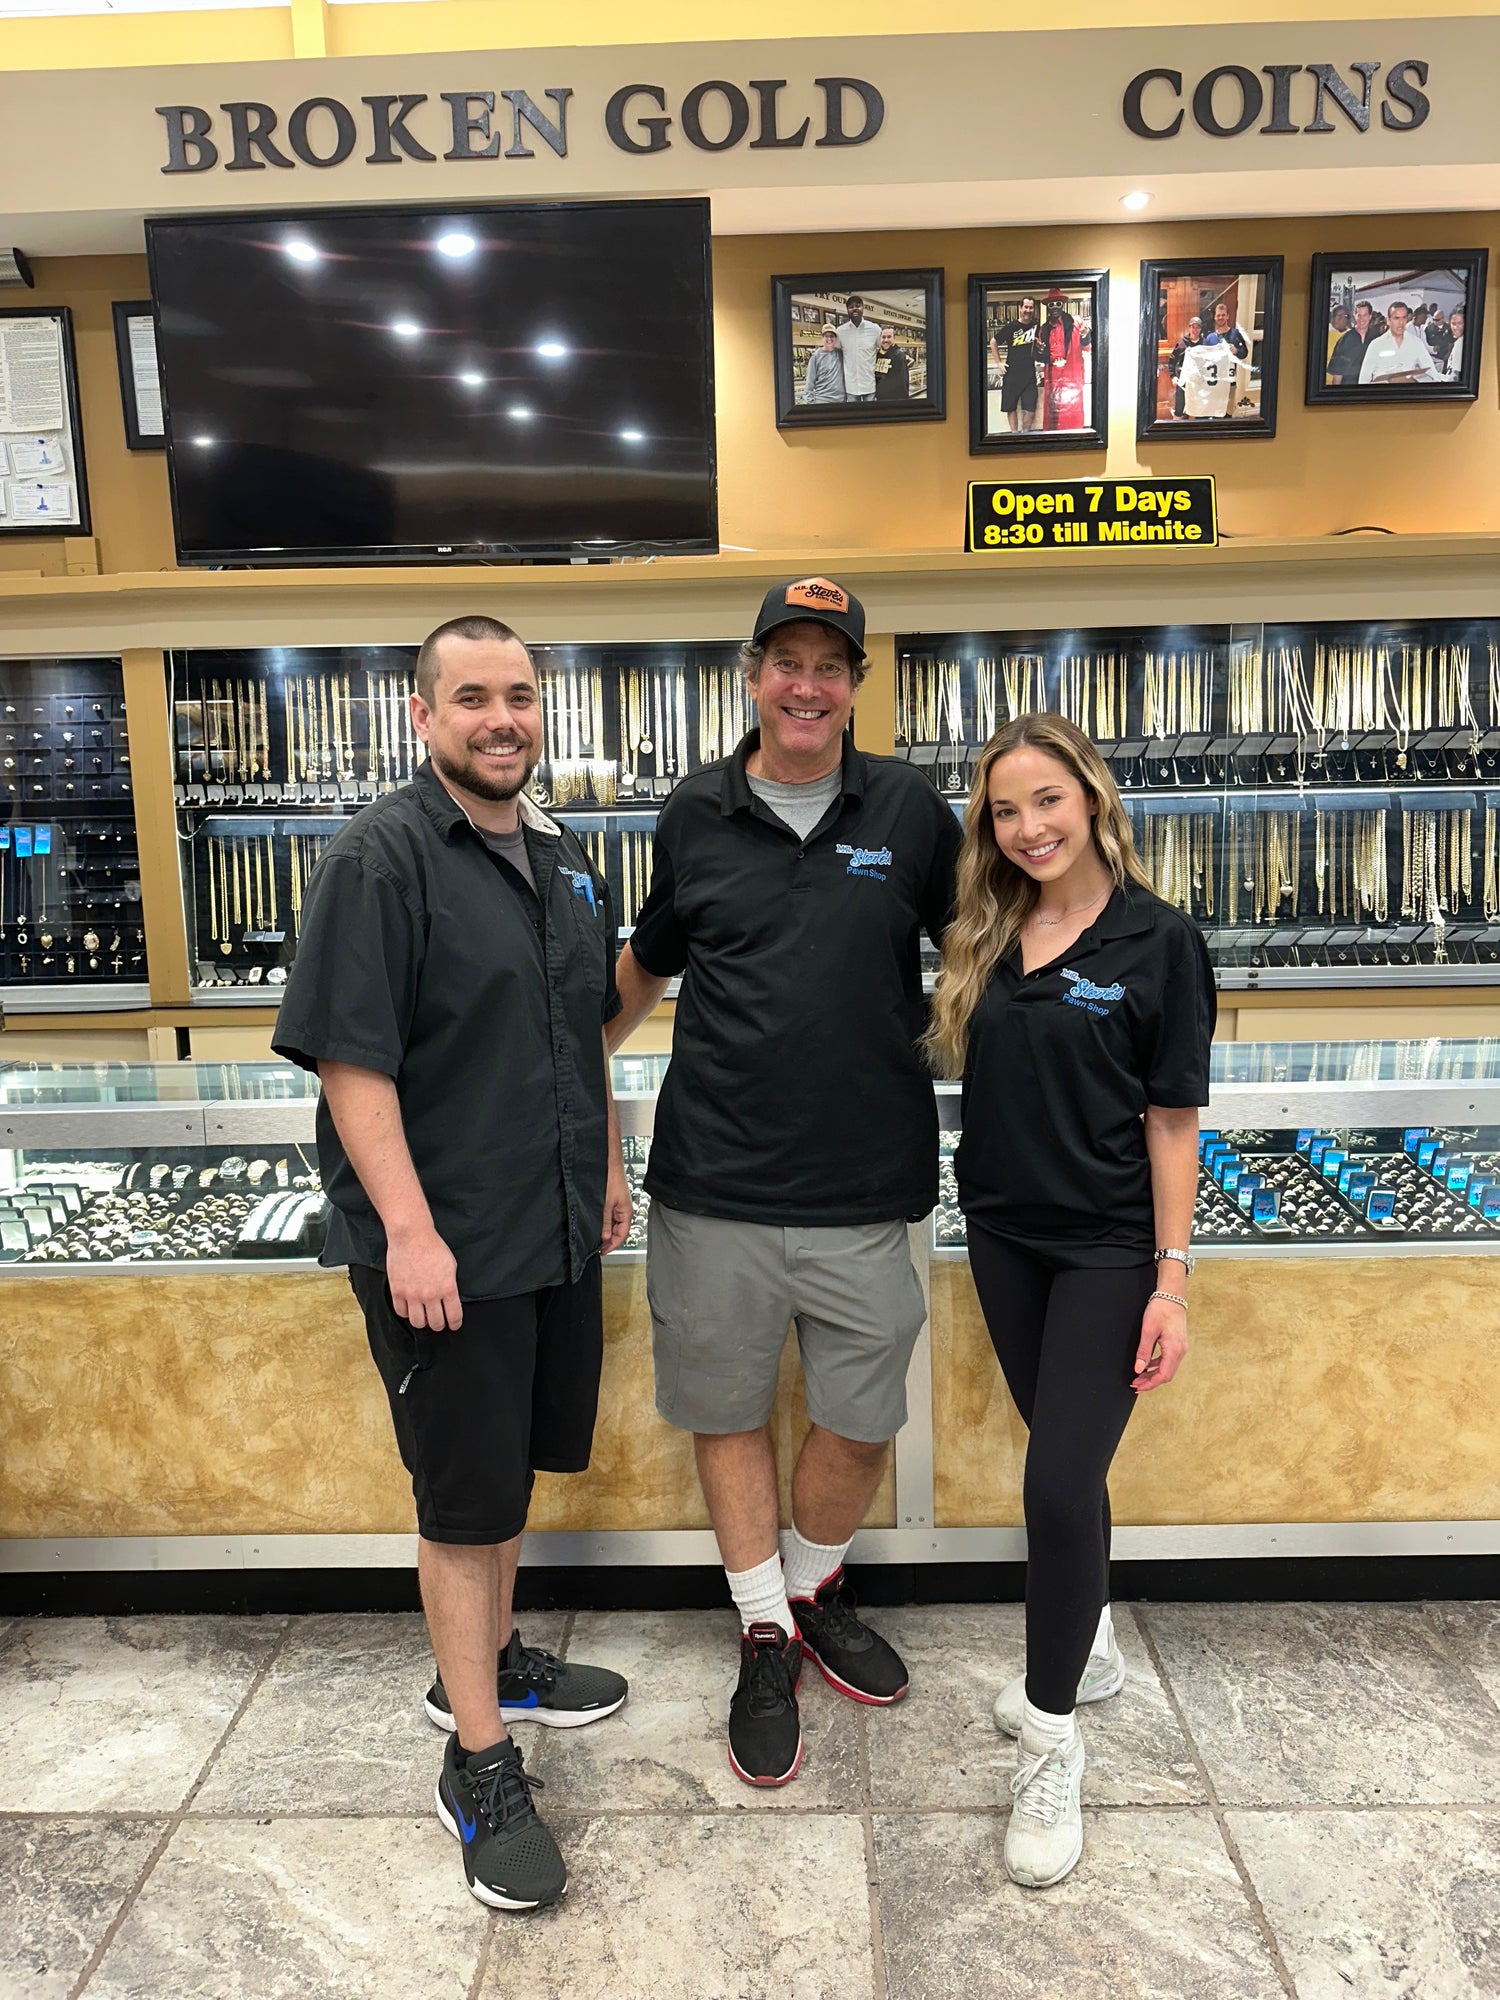 A son, father, and daughter smiling wearing Mr. Steve's Pawn Shop polos.